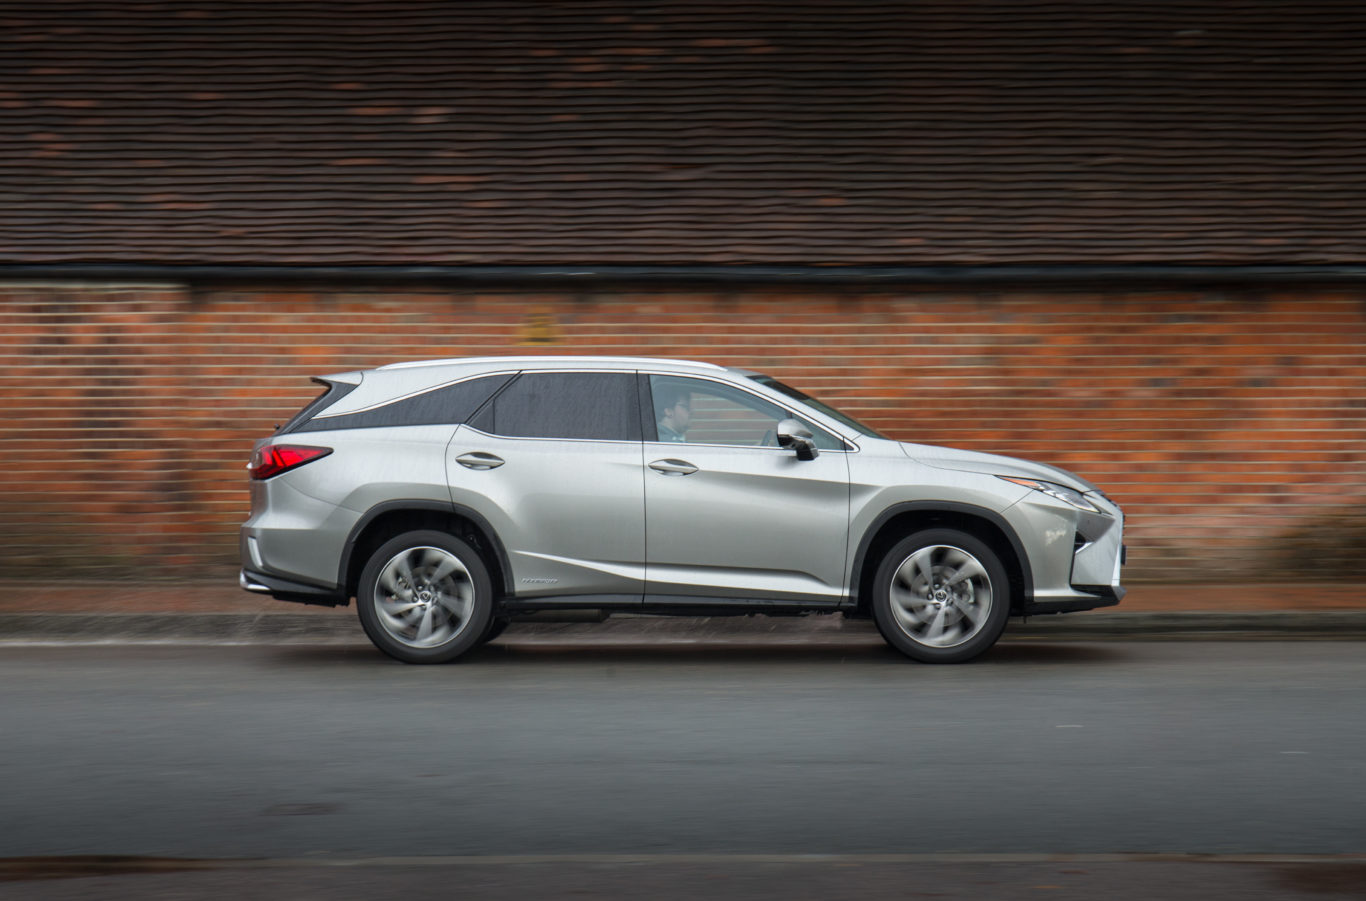 The Lexus RX L represents the luxury end of the hybrid segment